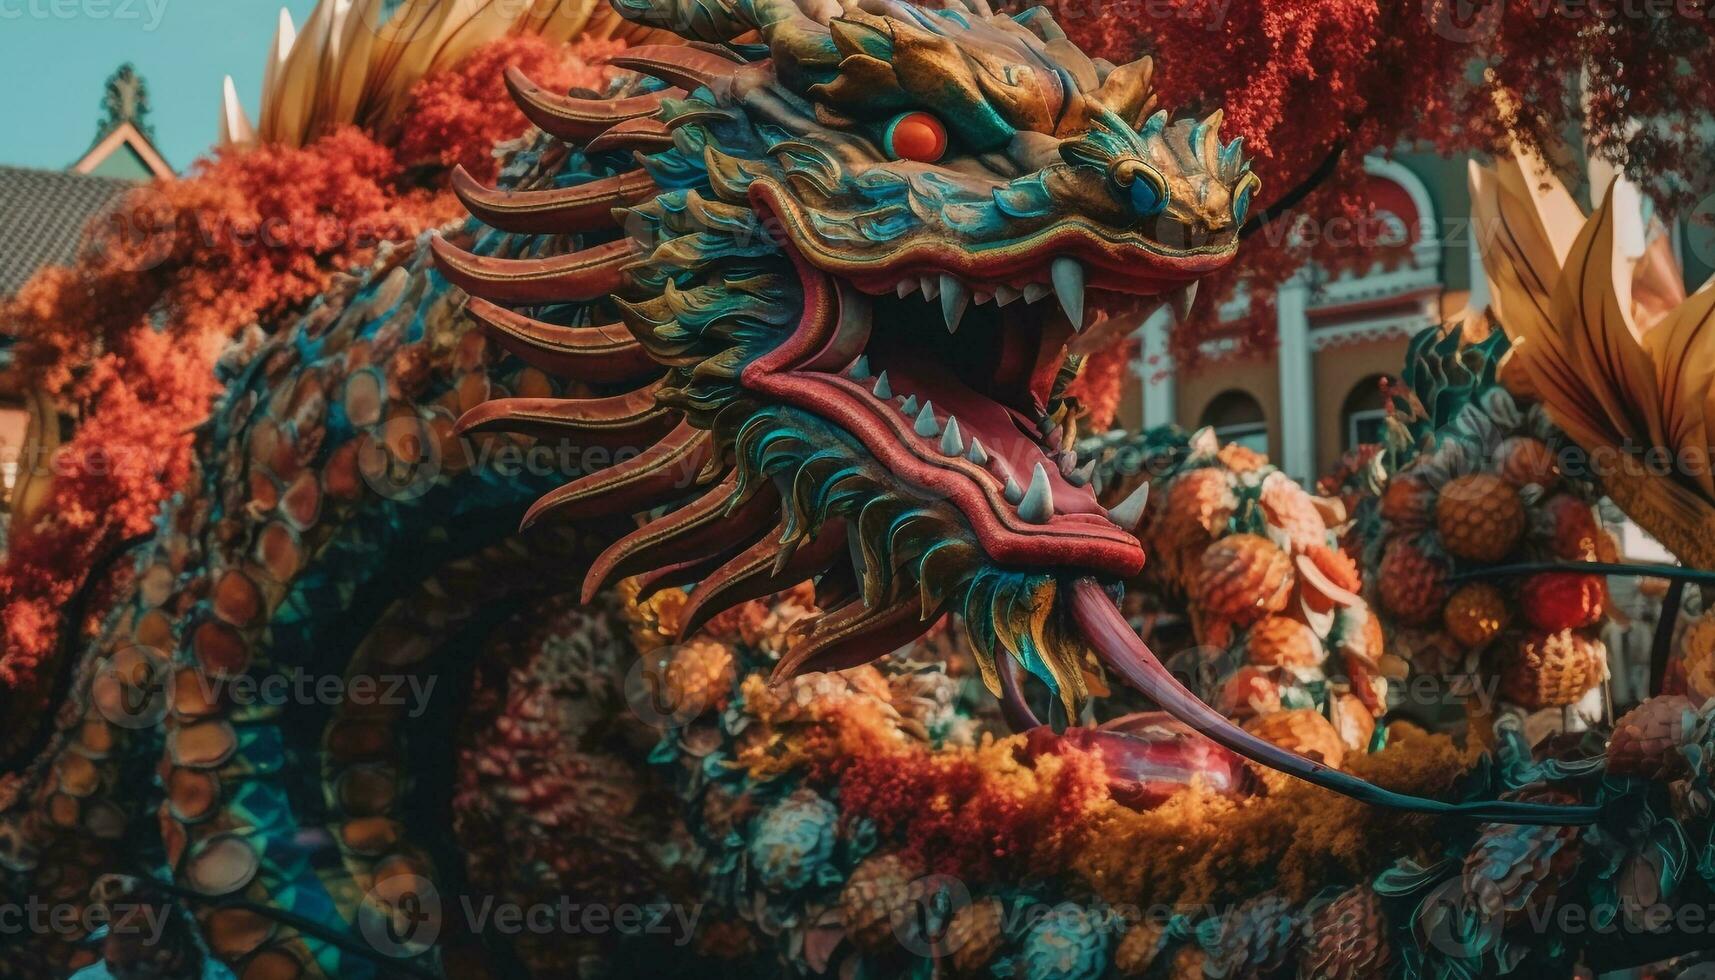 Vibrant dragon sculpture symbolizes Chinese spirituality and culture generated by AI photo